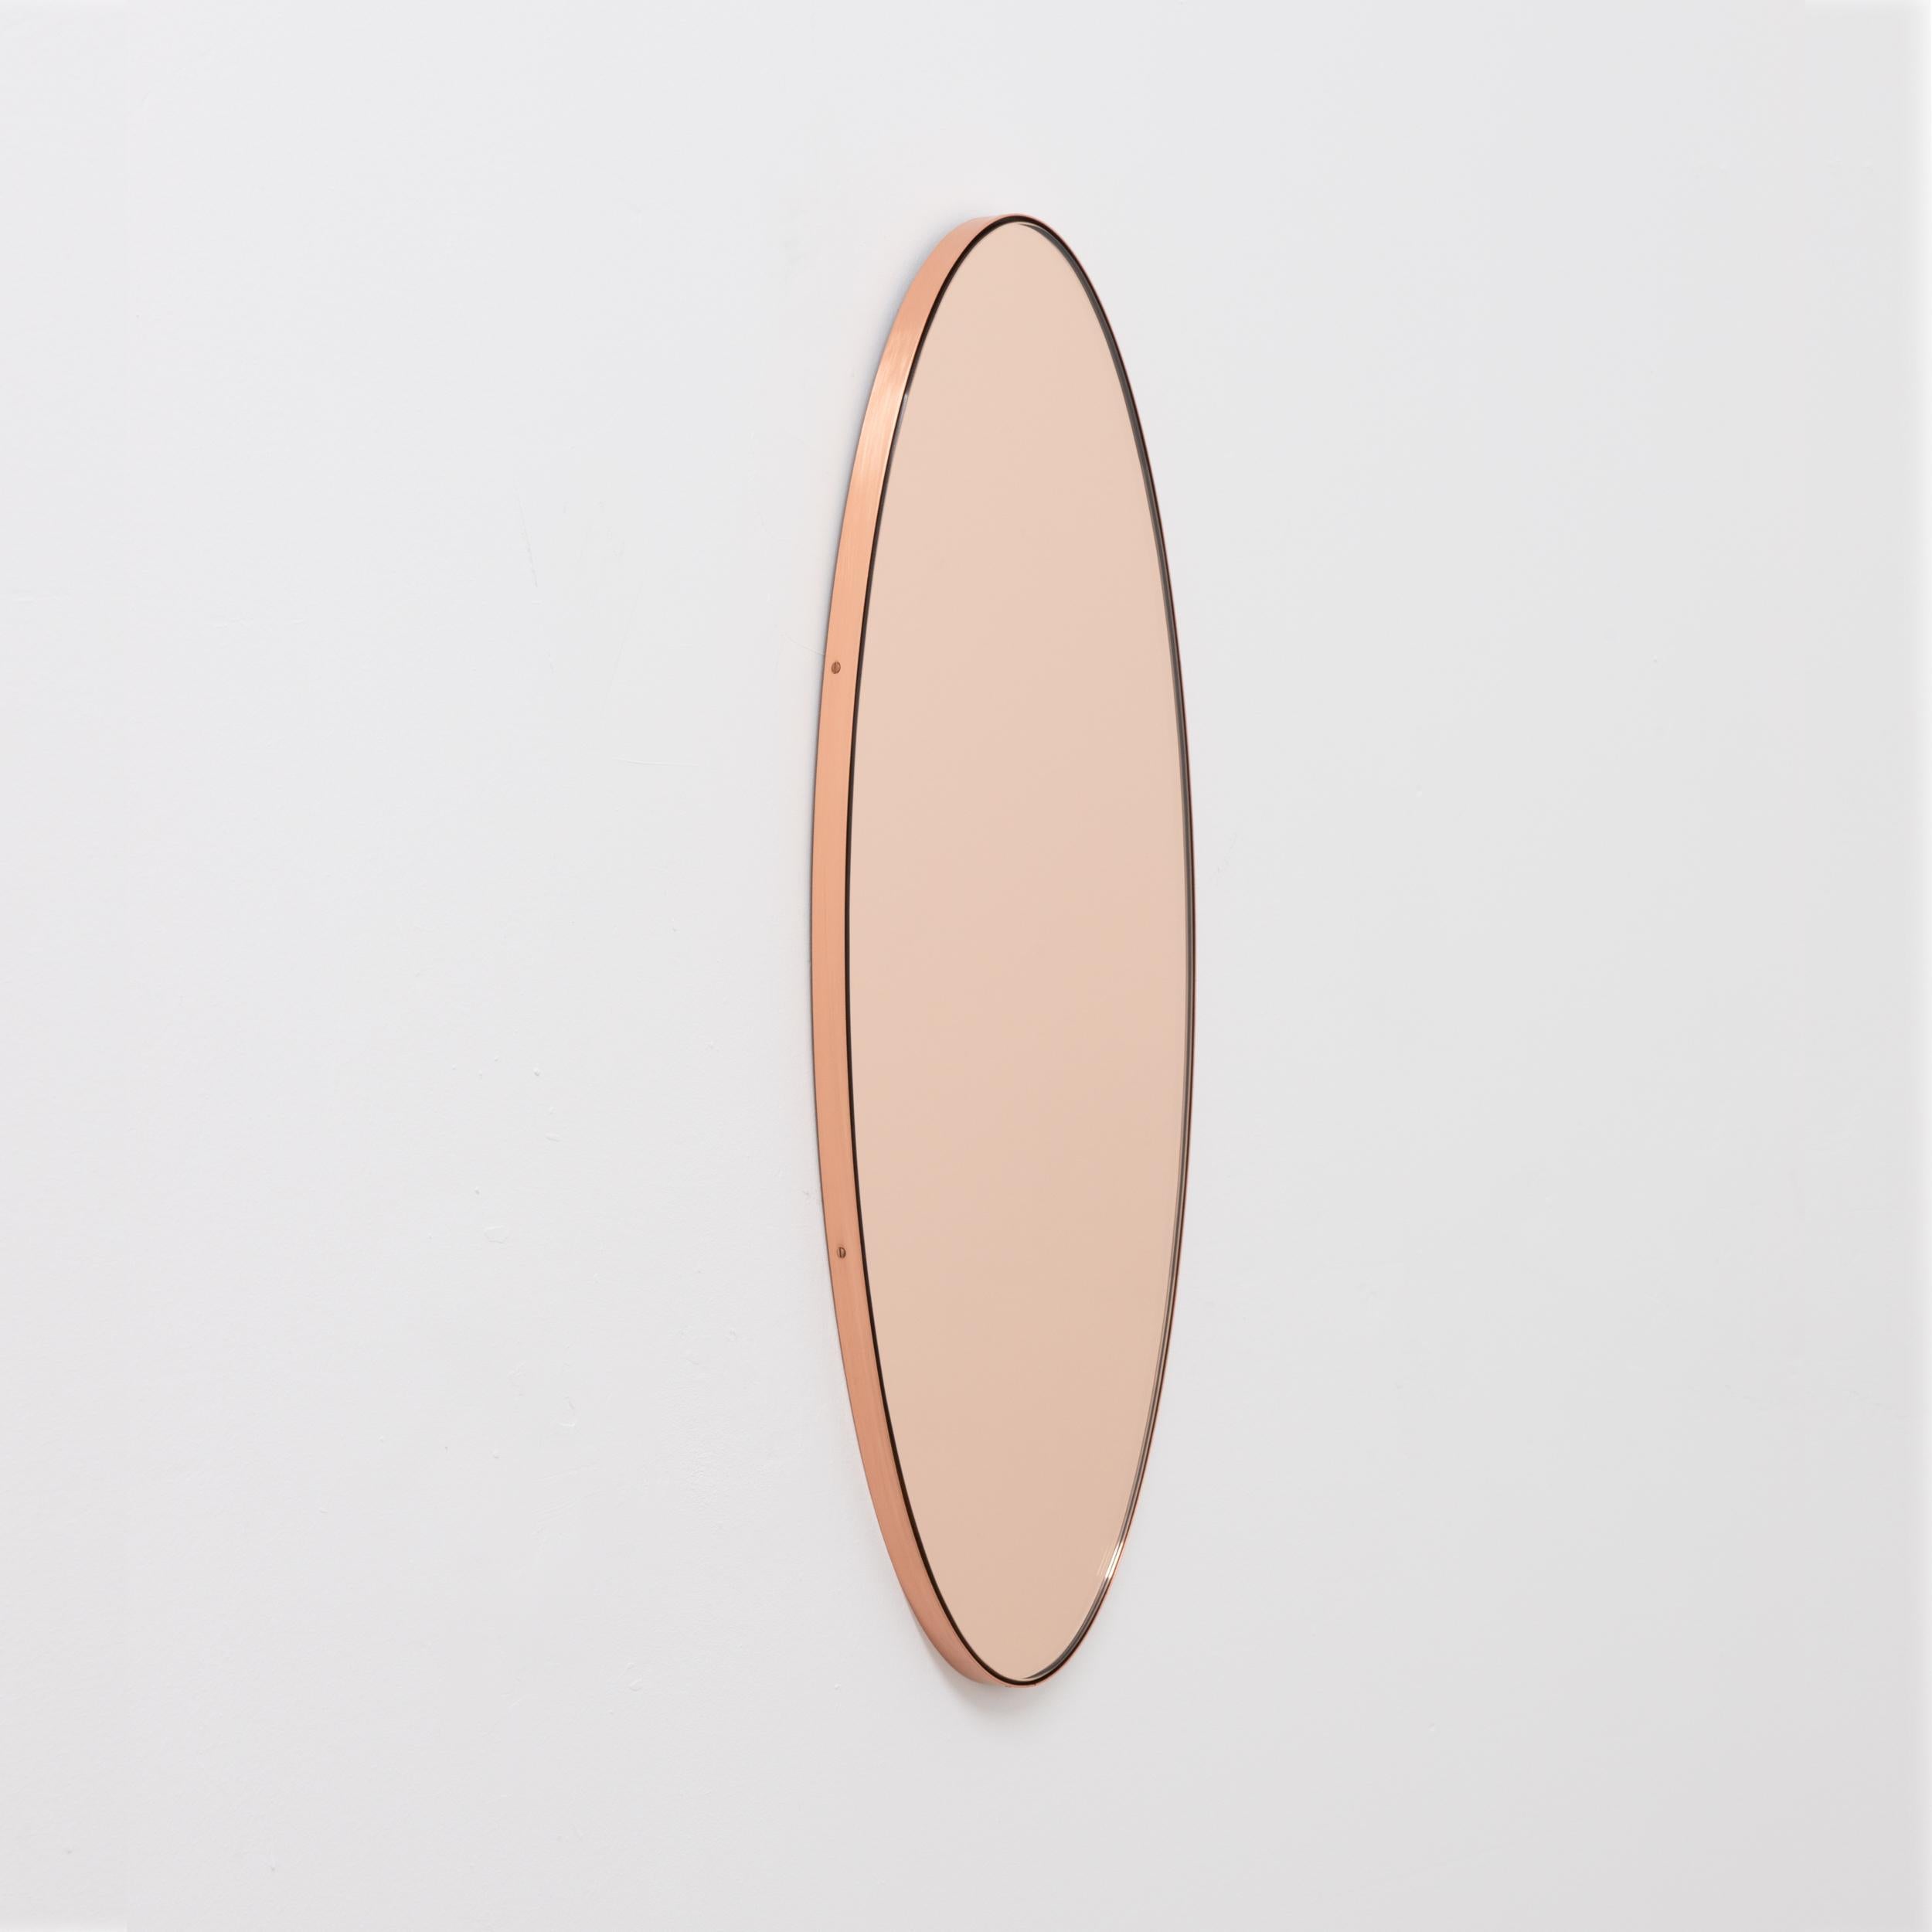 rose gold oval mirror